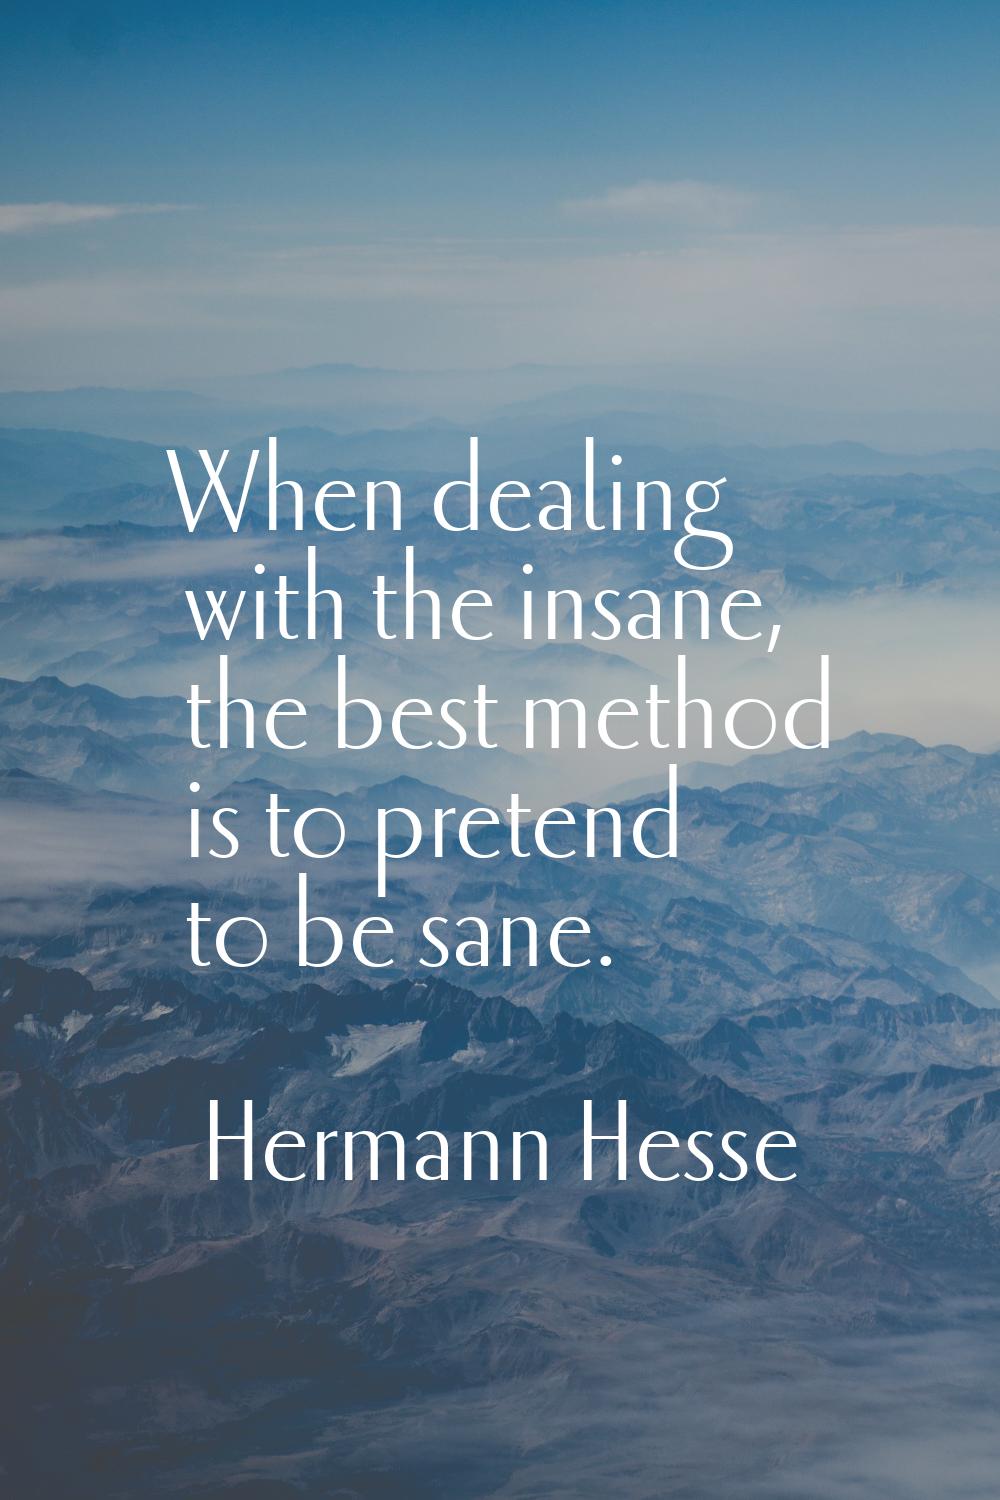 When dealing with the insane, the best method is to pretend to be sane.